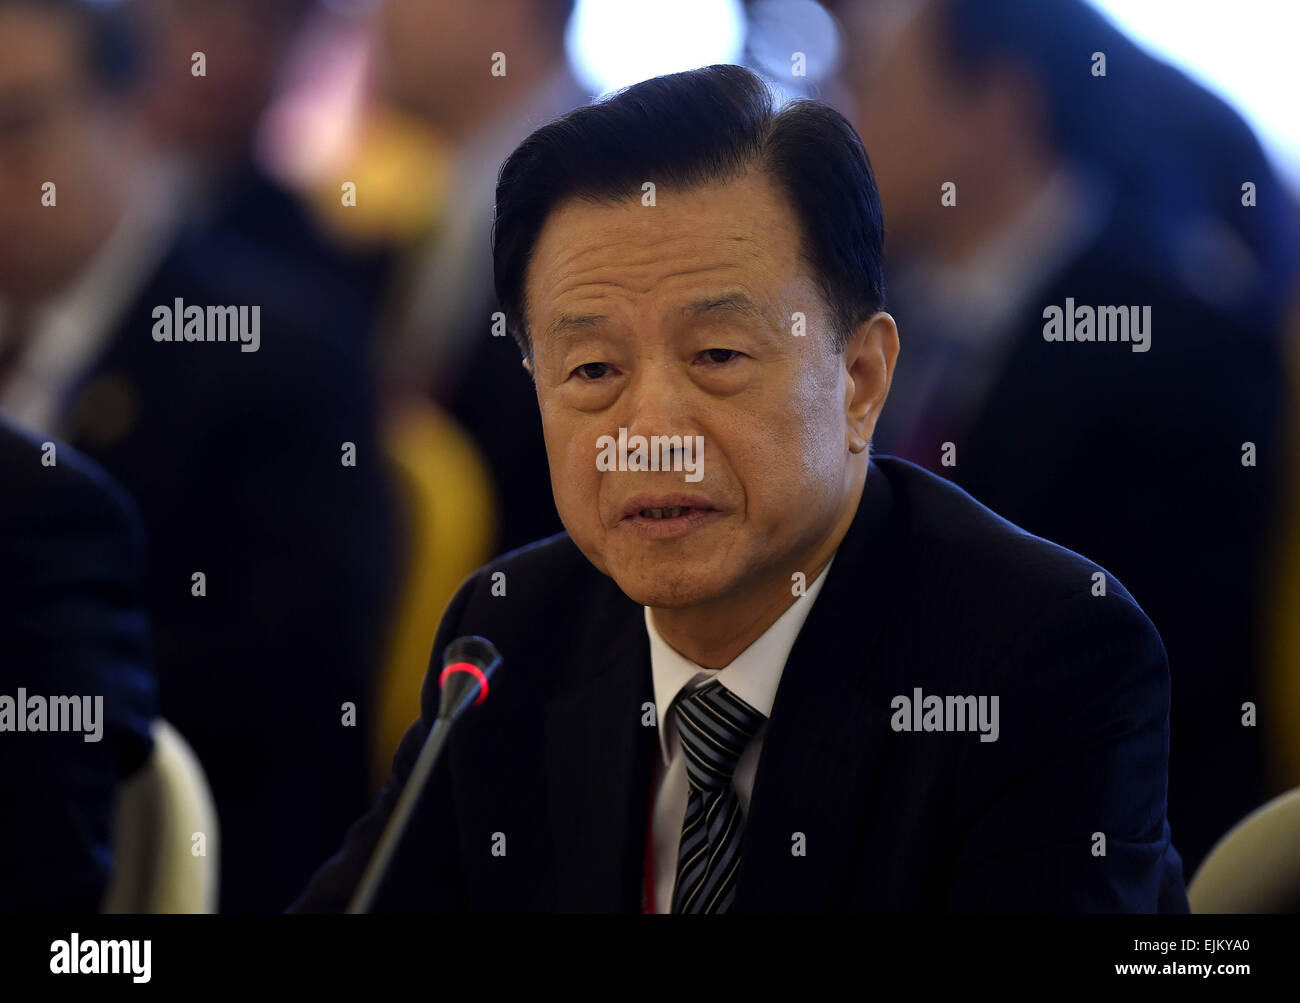 Boao, China's Hainan Province. 29th Mar, 2015. Founder and Chairman of Shimao Group Hui Wing Mau speaks at an overseas Chinese business roundtable during the 2015 Boao Forum for Asia (BFA) in Boao, south China's Hainan Province, March 29, 2015. © Guo Cheng/Xinhua/Alamy Live News Stock Photo